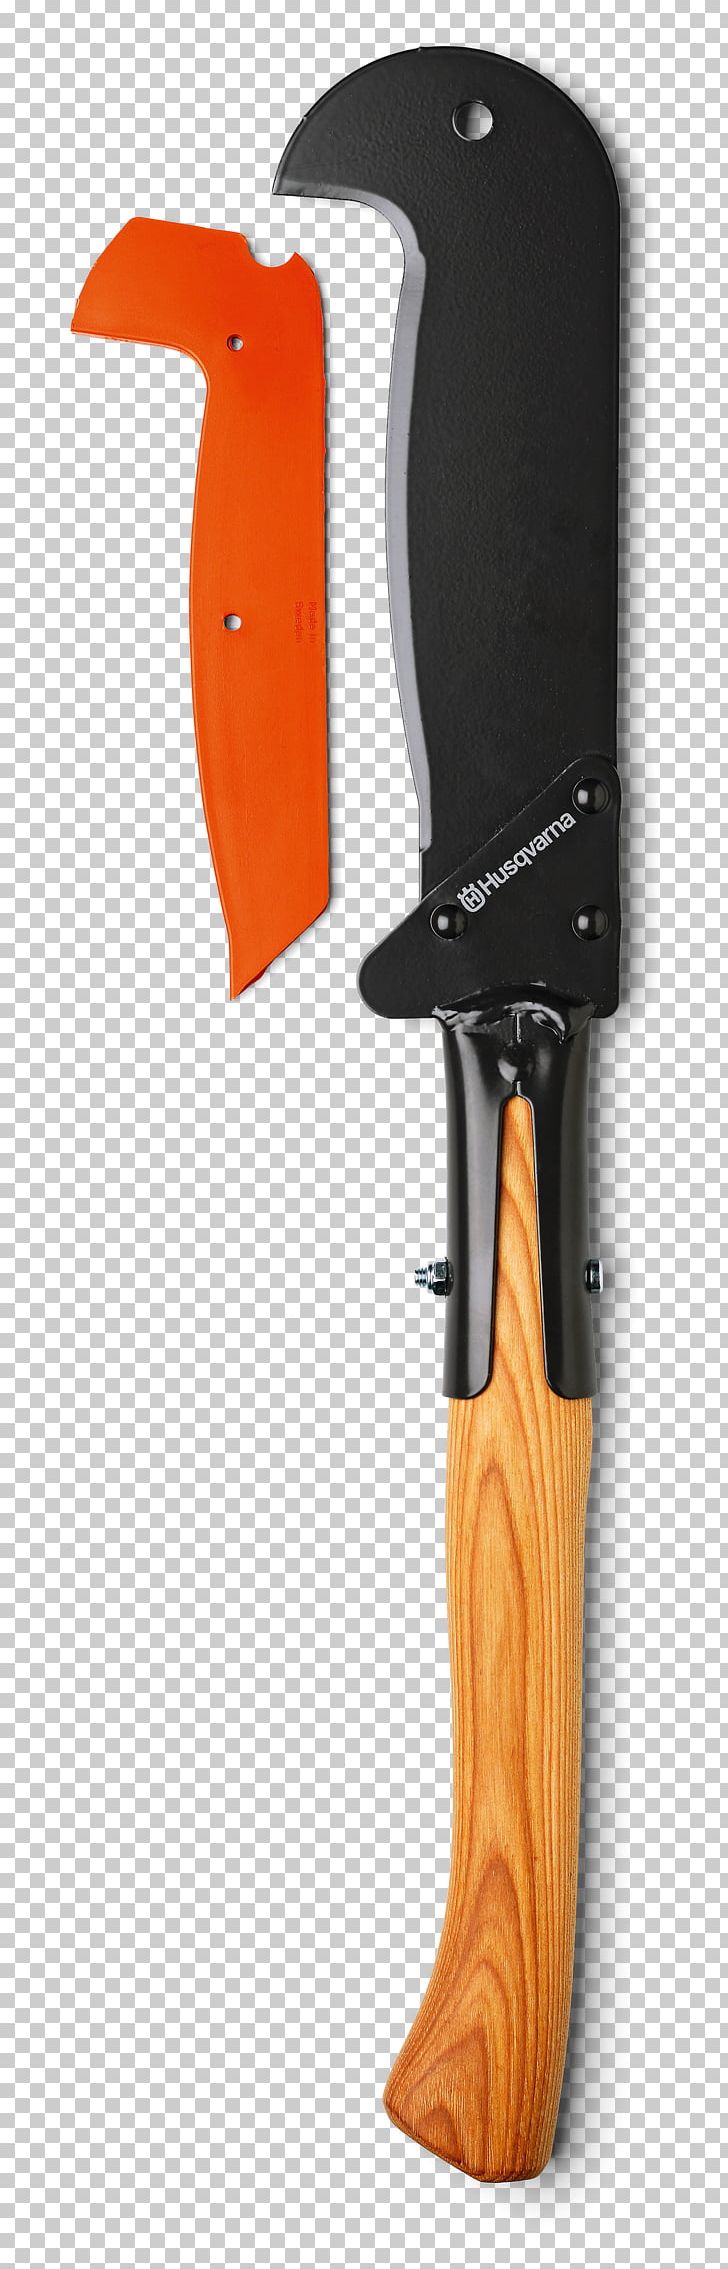 Knife Axe Saw Husqvarna Group Blade PNG, Clipart, Axe, Blade, Cold Weapon, Gebrauchsgegenstand, Handle Free PNG Download